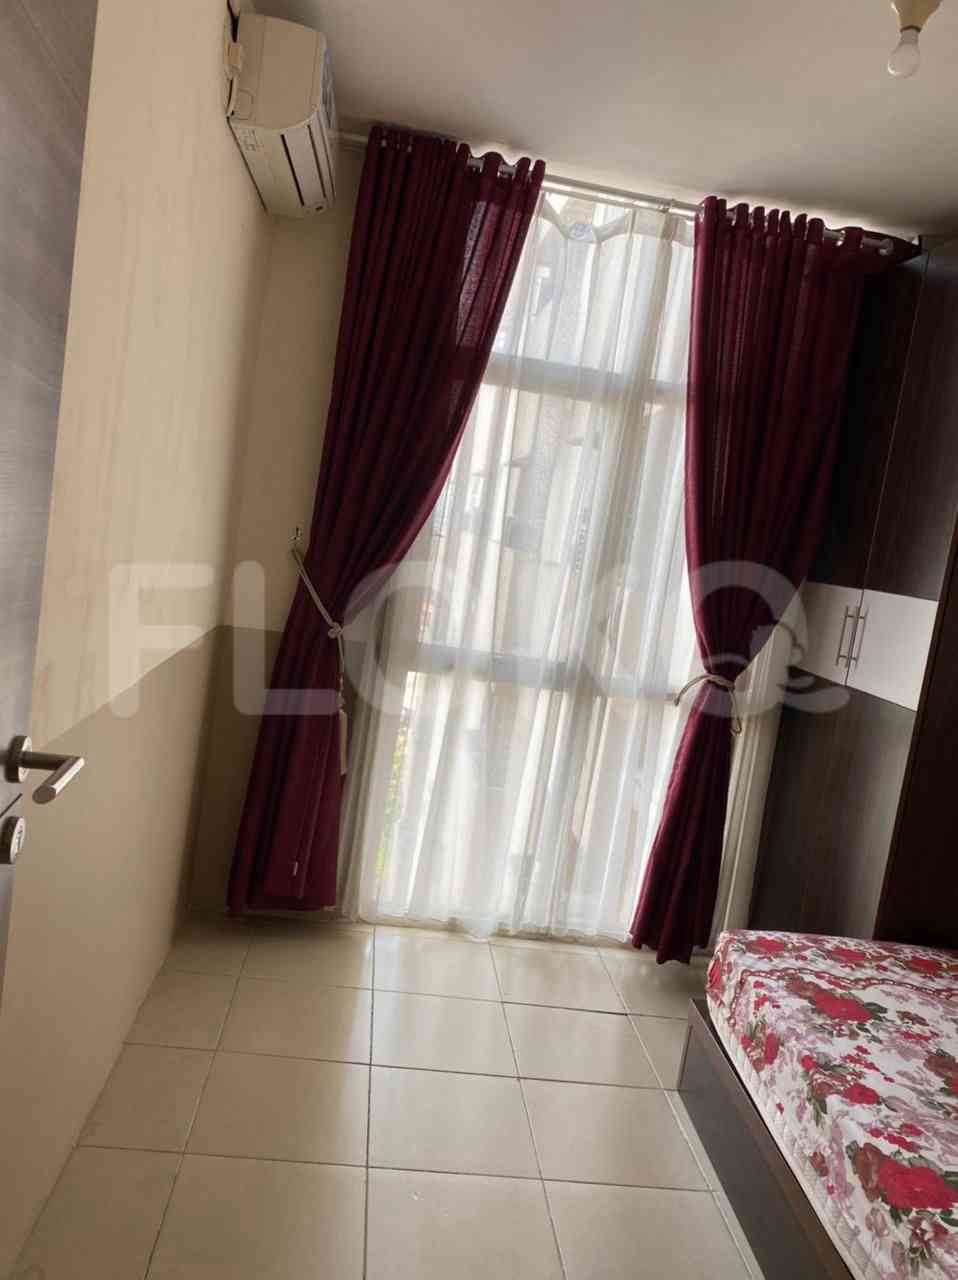 3 Bedroom on 7th Floor for Rent in The Medina Apartment - fka017 3